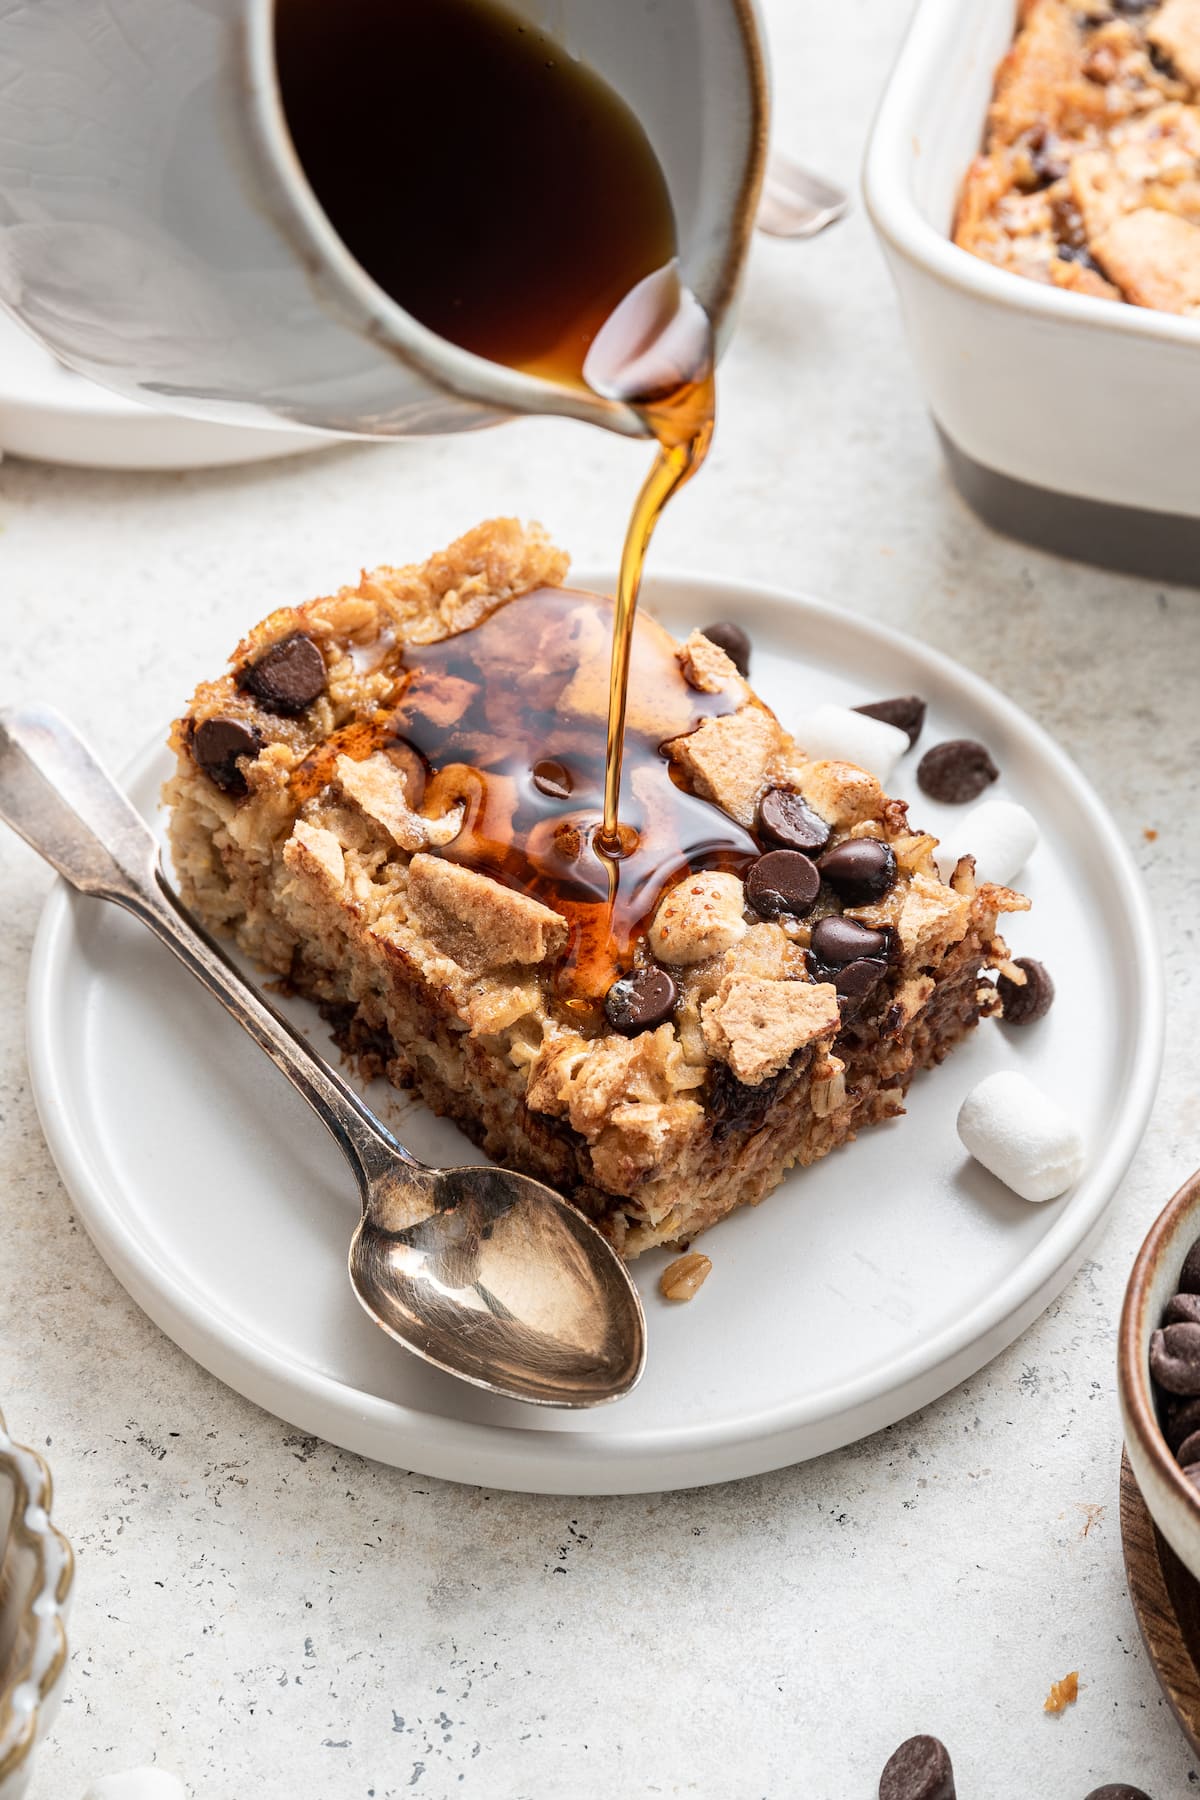 A white container of maple syrup is drizzled on top of a piece of the s'mores baked oatmeal placed on a small white plate with a spoon.